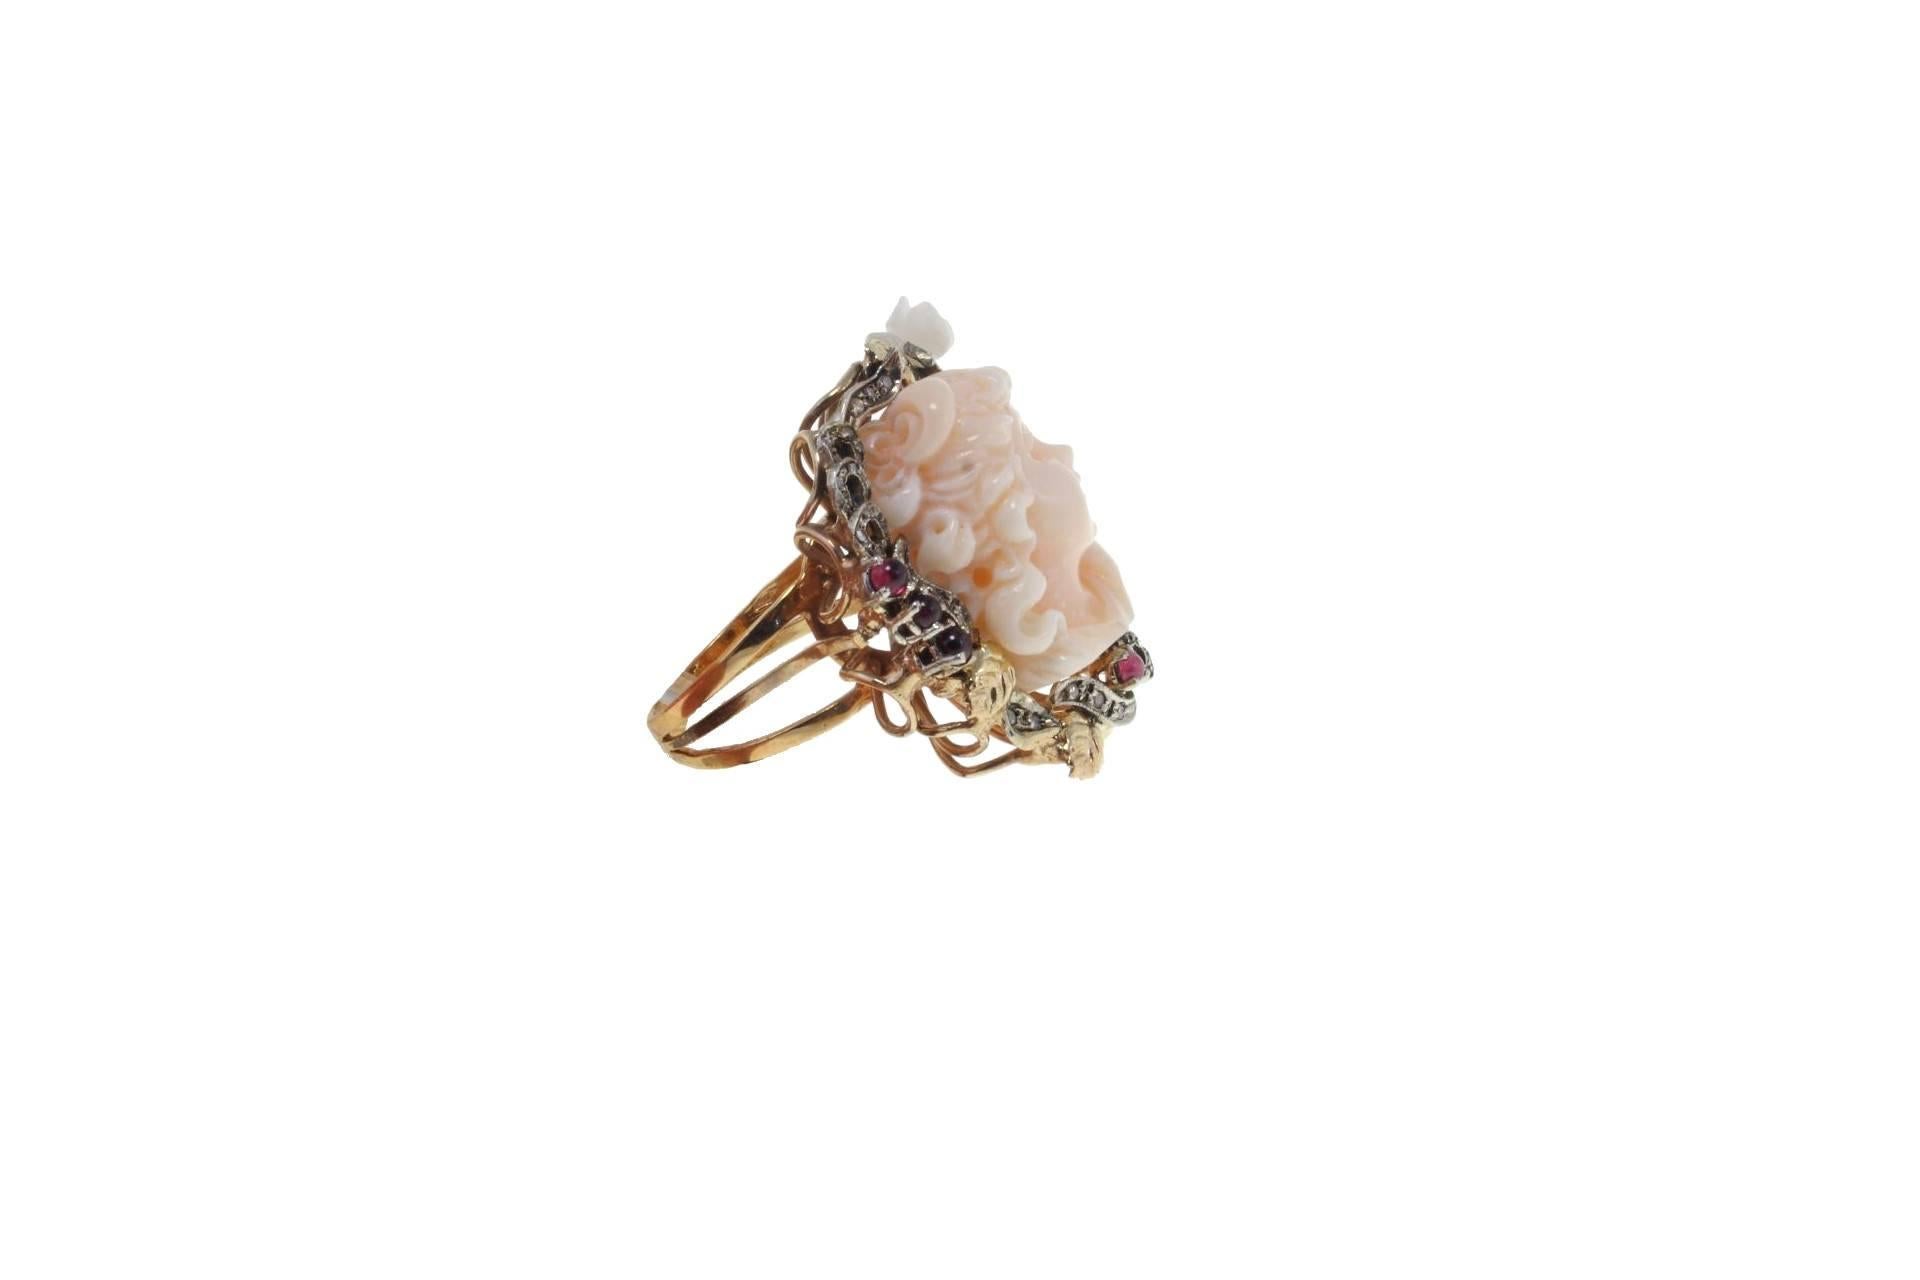 SHIPPING POLICY:
No additional costs will be added to this order.
Shipping costs will be totally covered by the seller (customs duties included).

Cocktail ring in 9kt rose gold and silver with a  central carved coral face surrounded by diamonds and